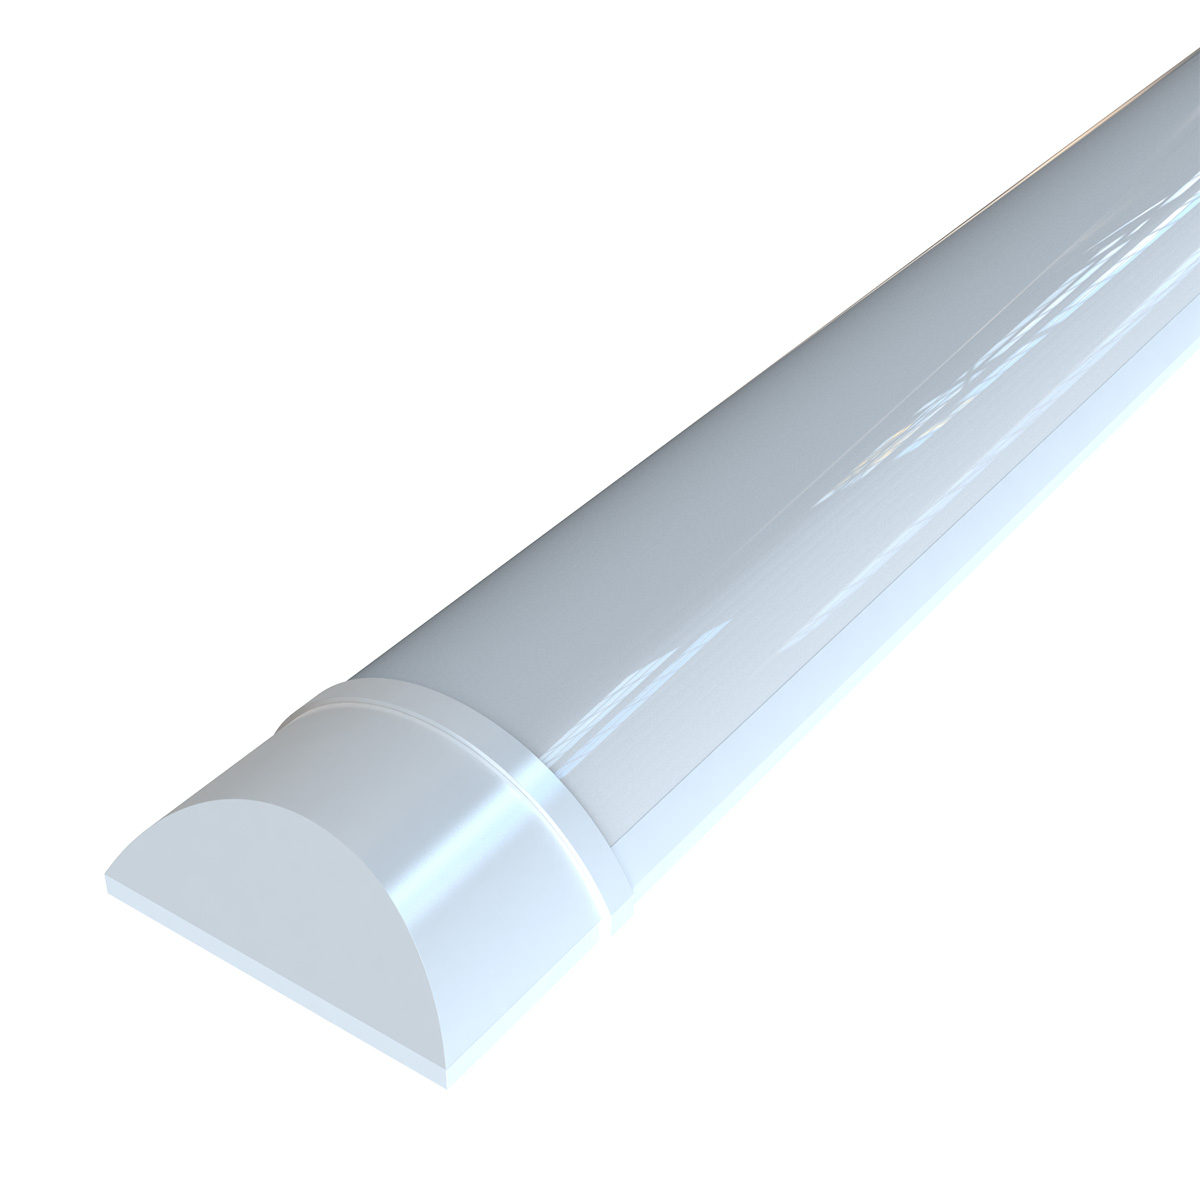 View 2 Foot 600mm 20w LED Batten 6000K Cool White With Samsung Chips information